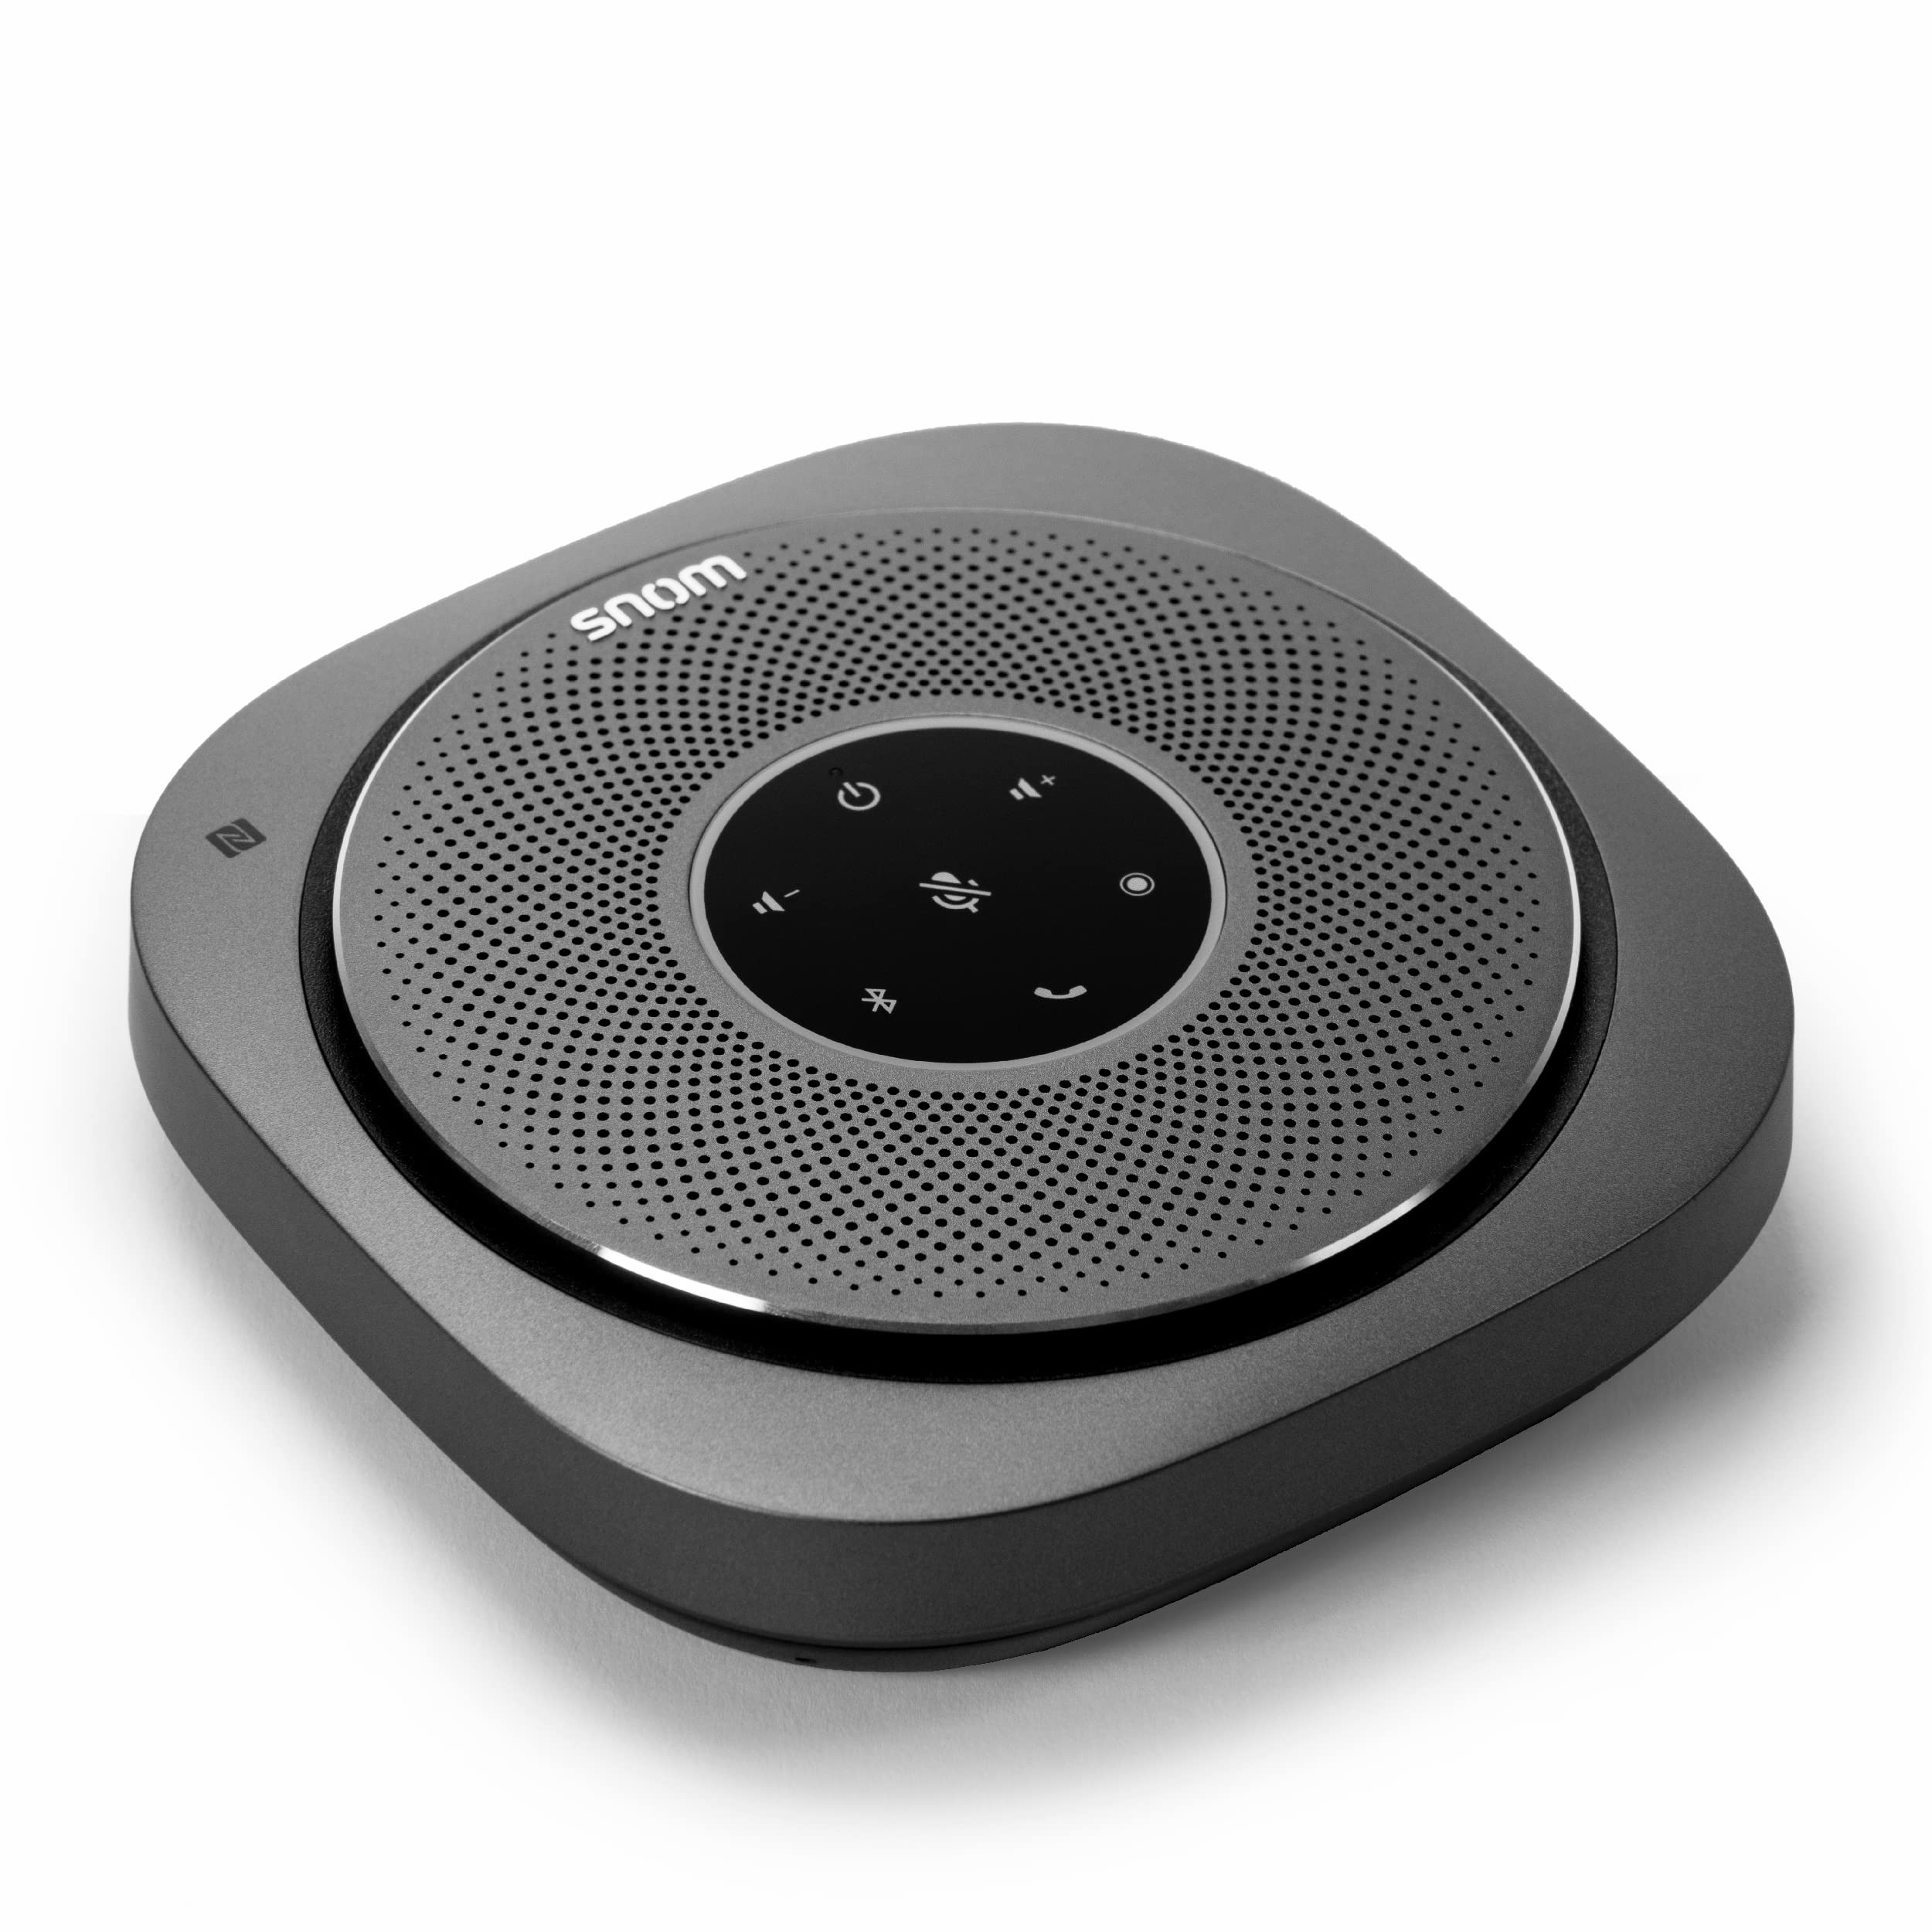 Snom C300 Bluetooth 5.0 Conference Speakerphone with 6 Mics, 24 hrs Call Time, App Controlled, USB C, Home Office & Small Business, Black